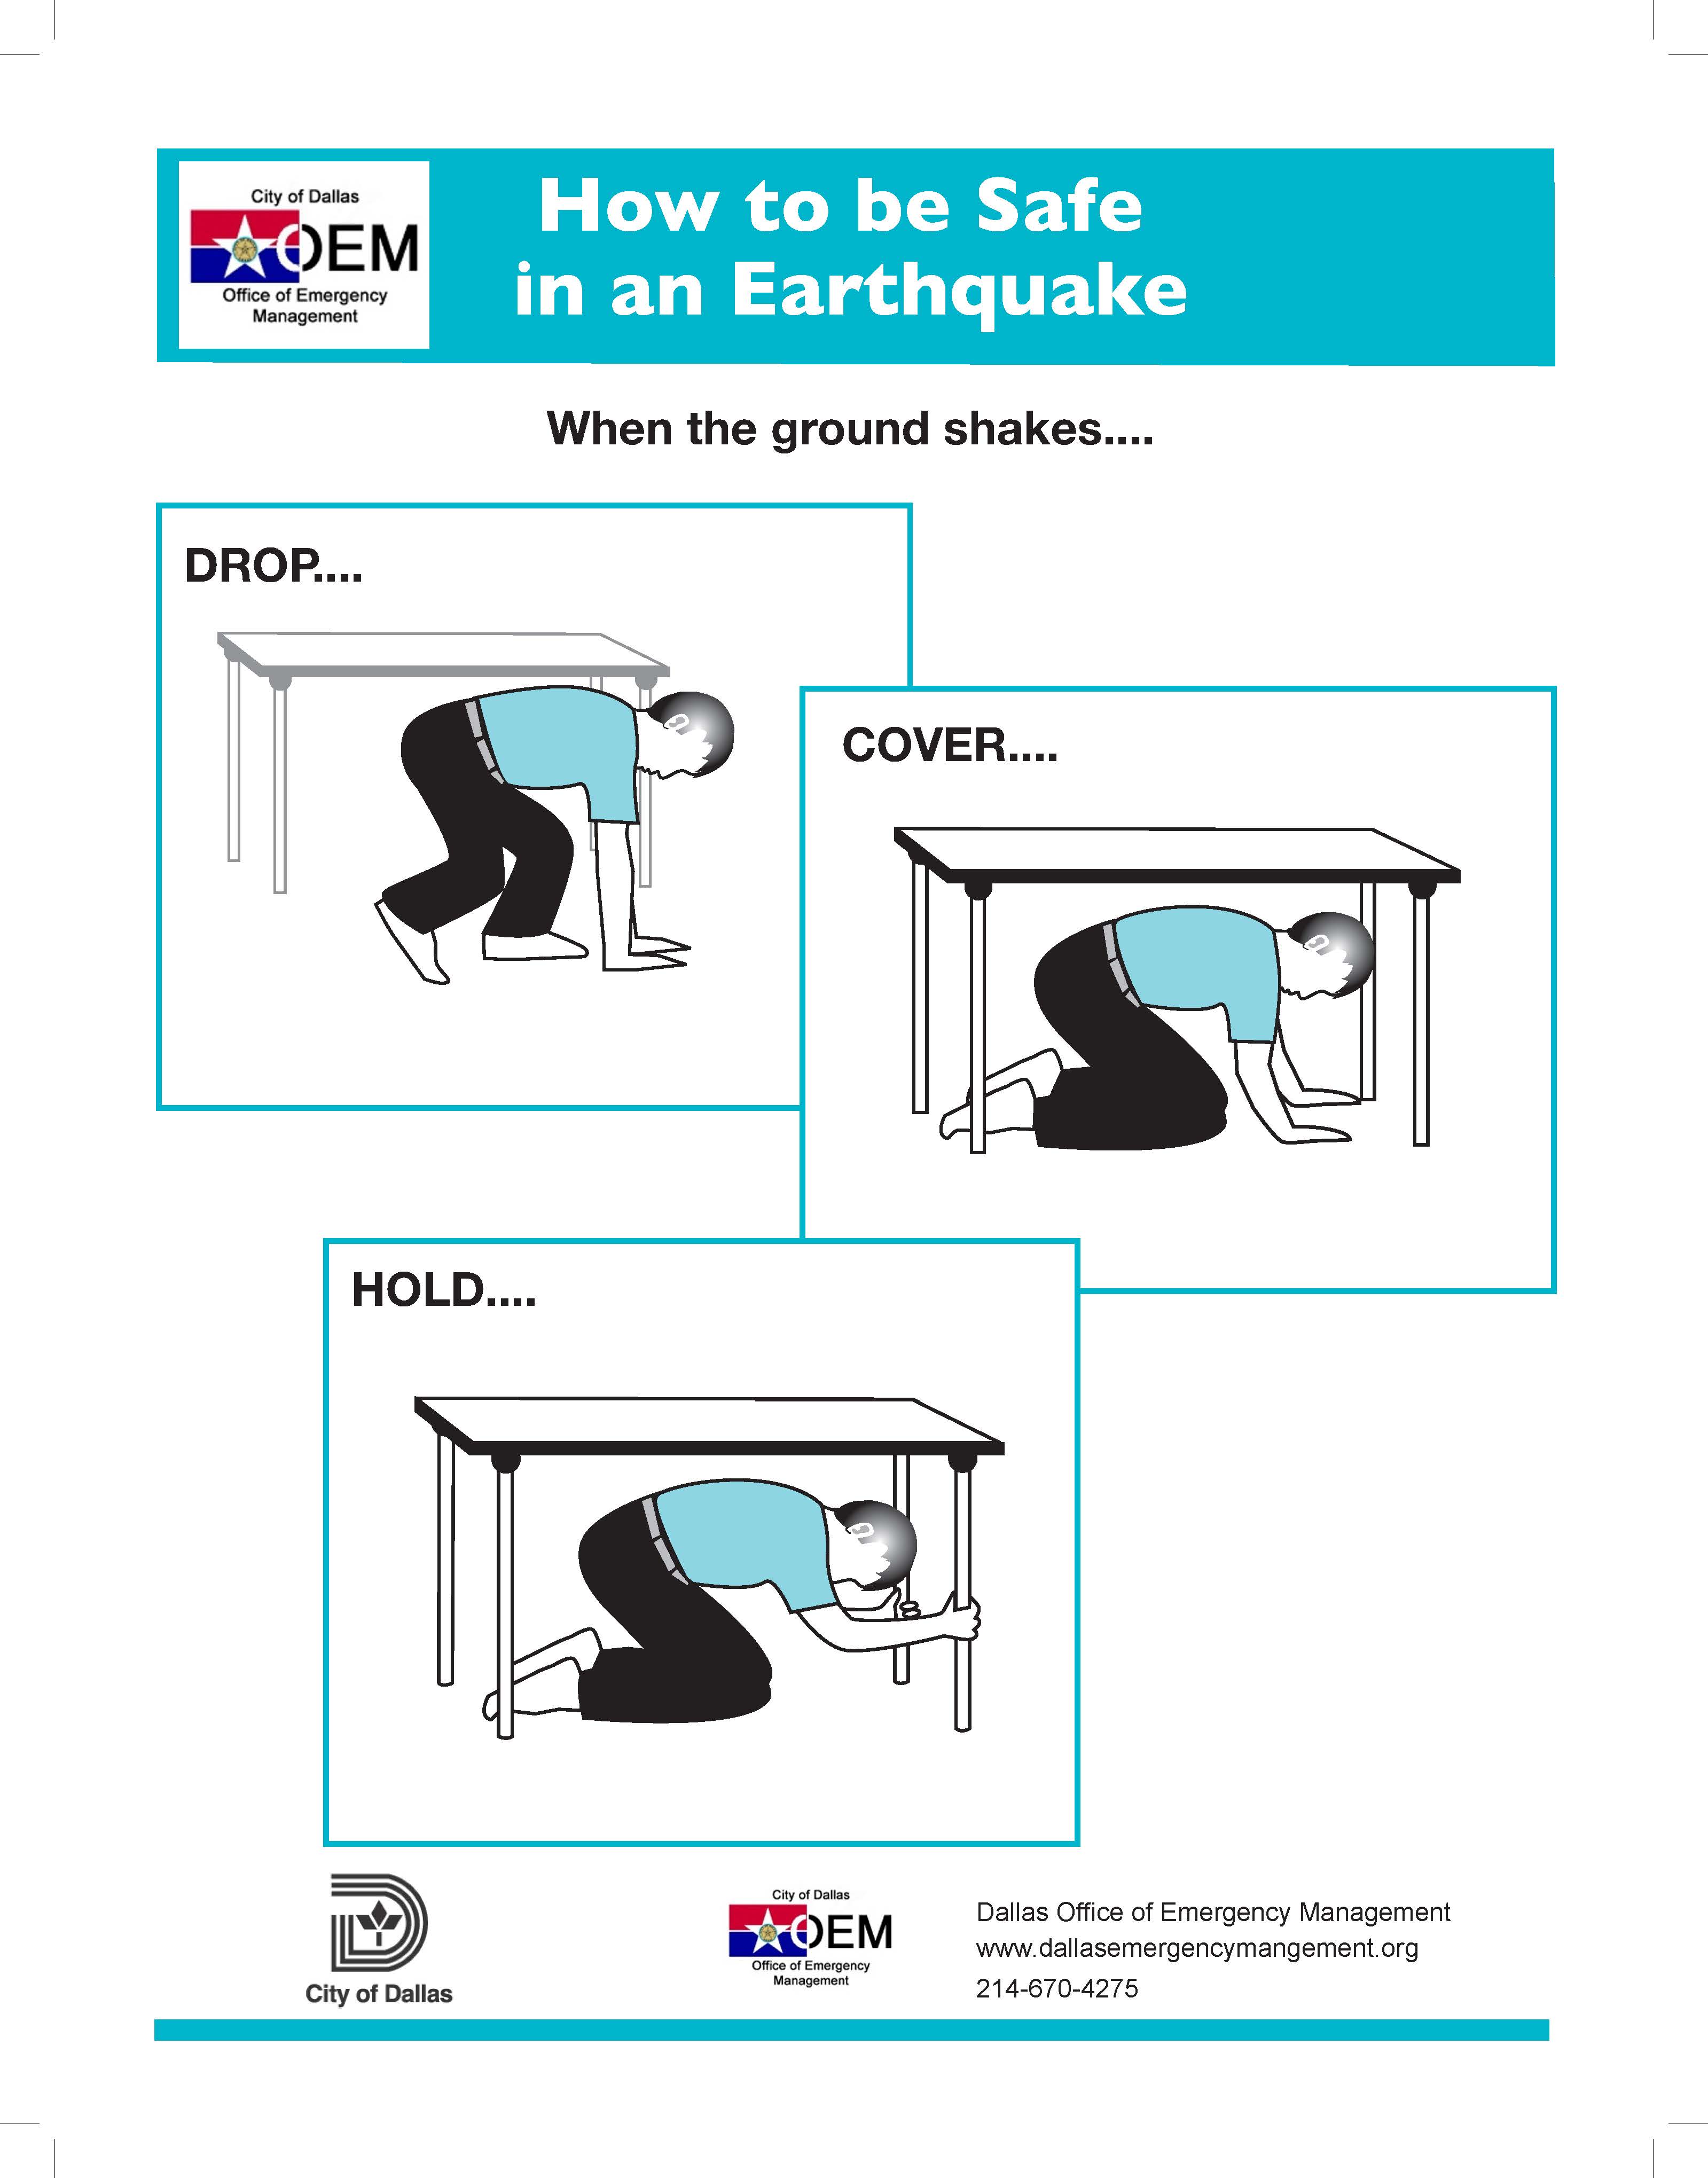 Drop Cover Hold Earthquake Safety infographic pg 1